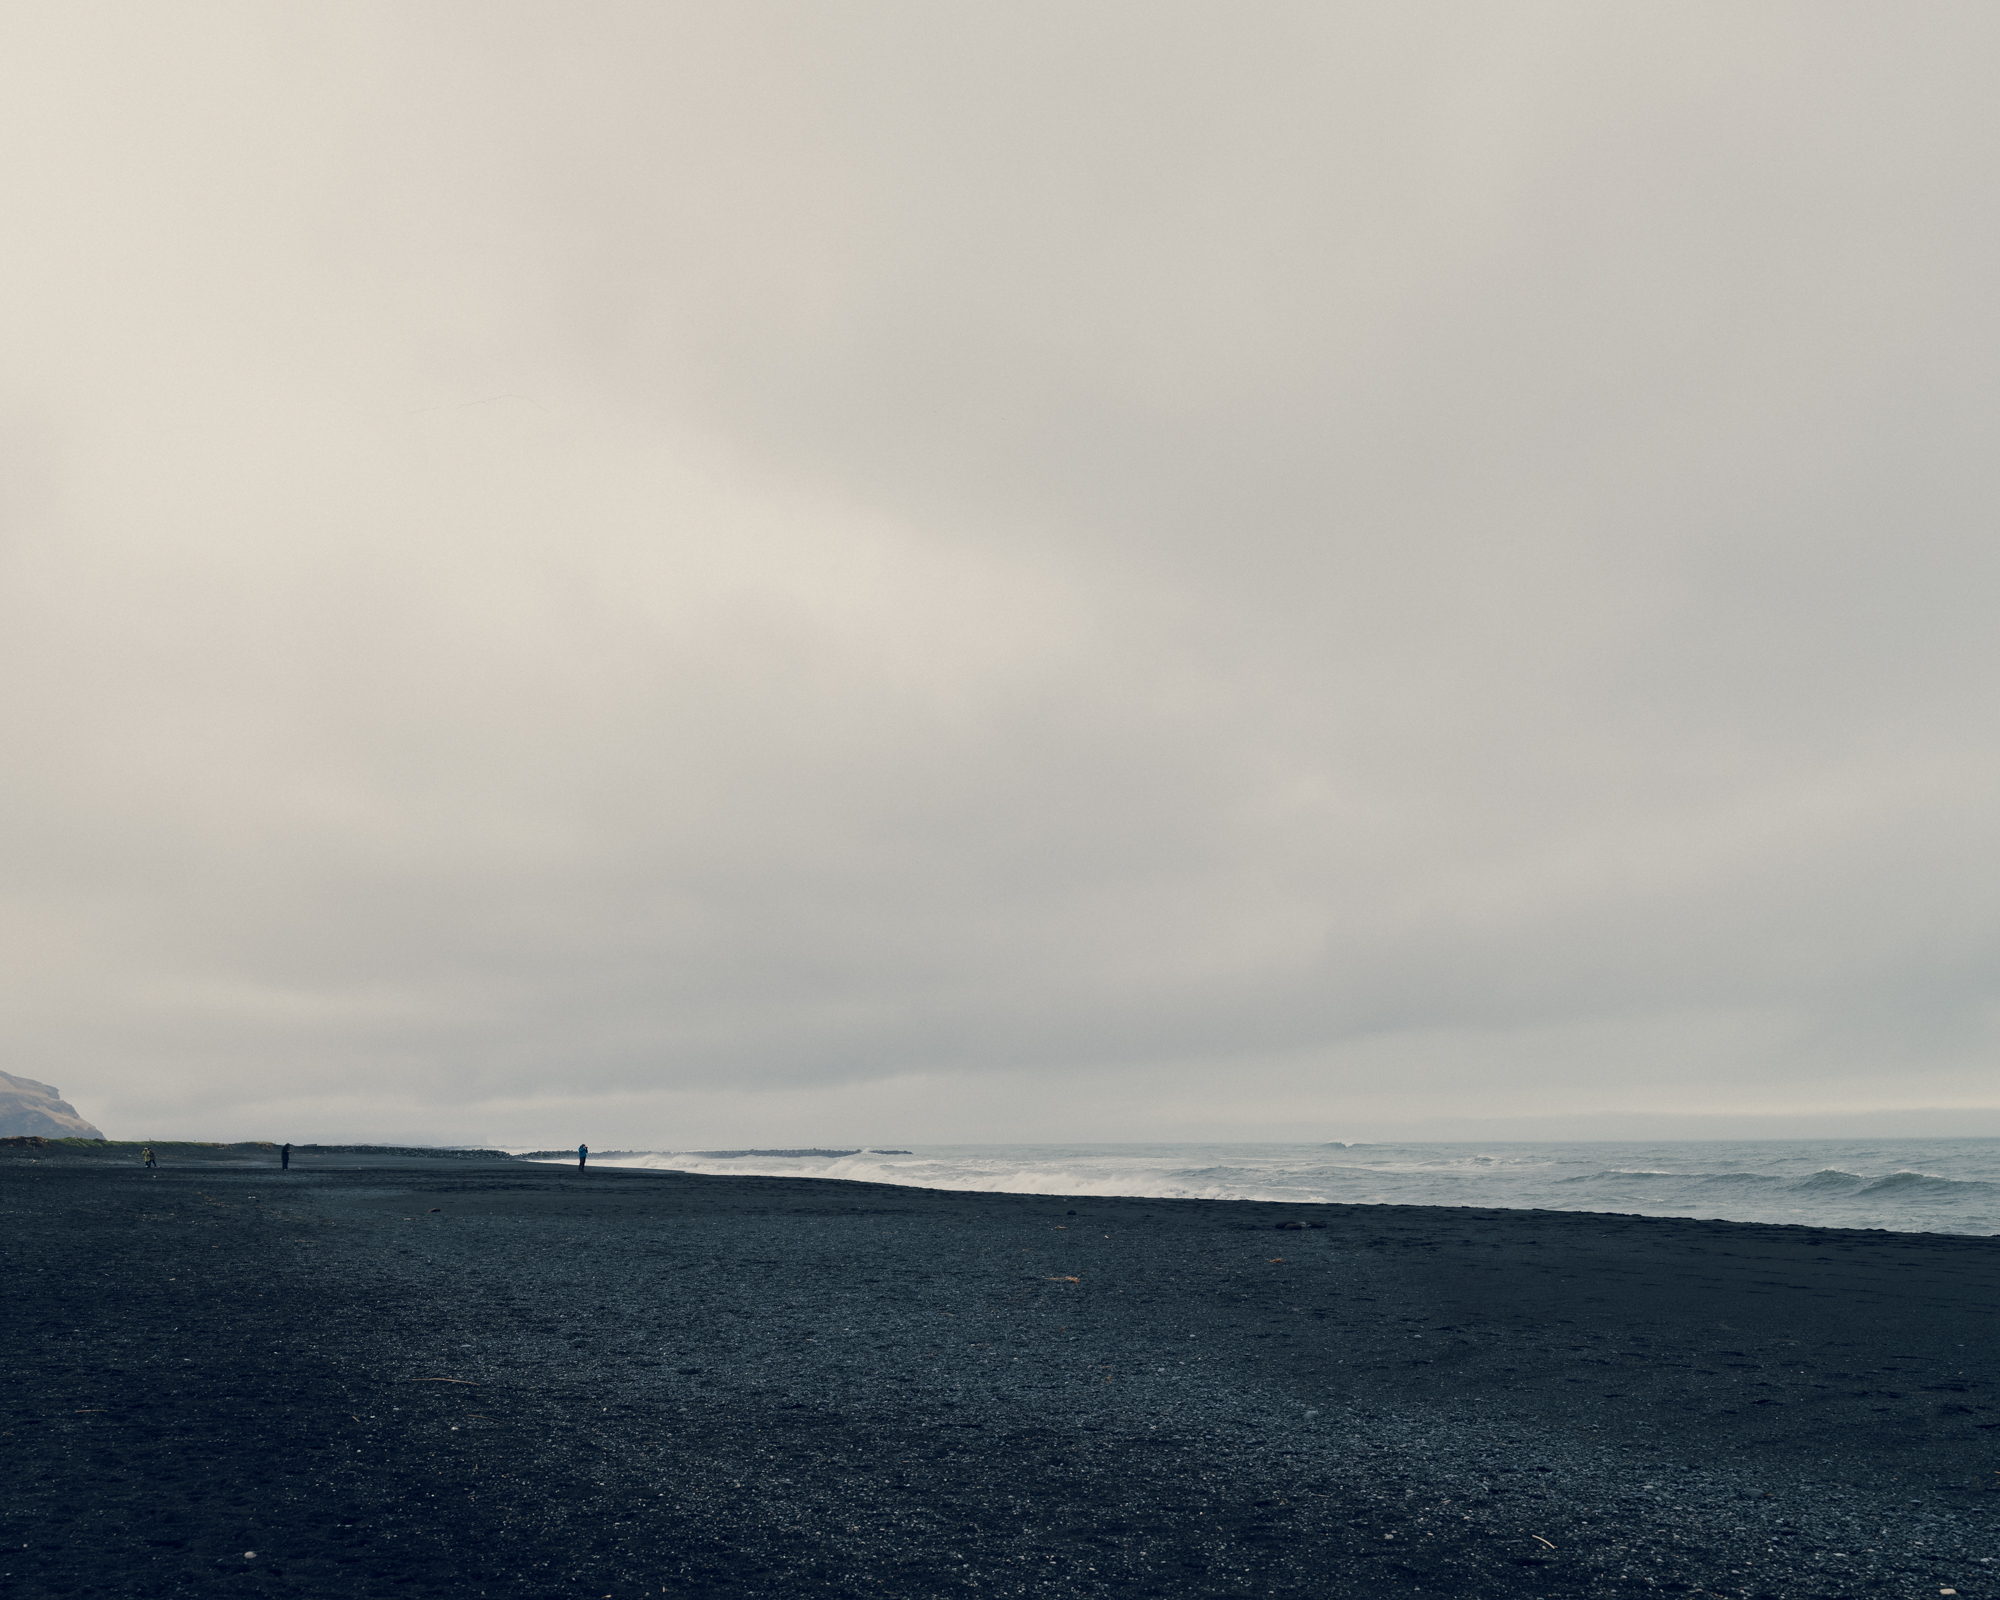 Black Sand Beach in Iceland: Dramatic beauty of Iceland's iconic volcanic shoreline